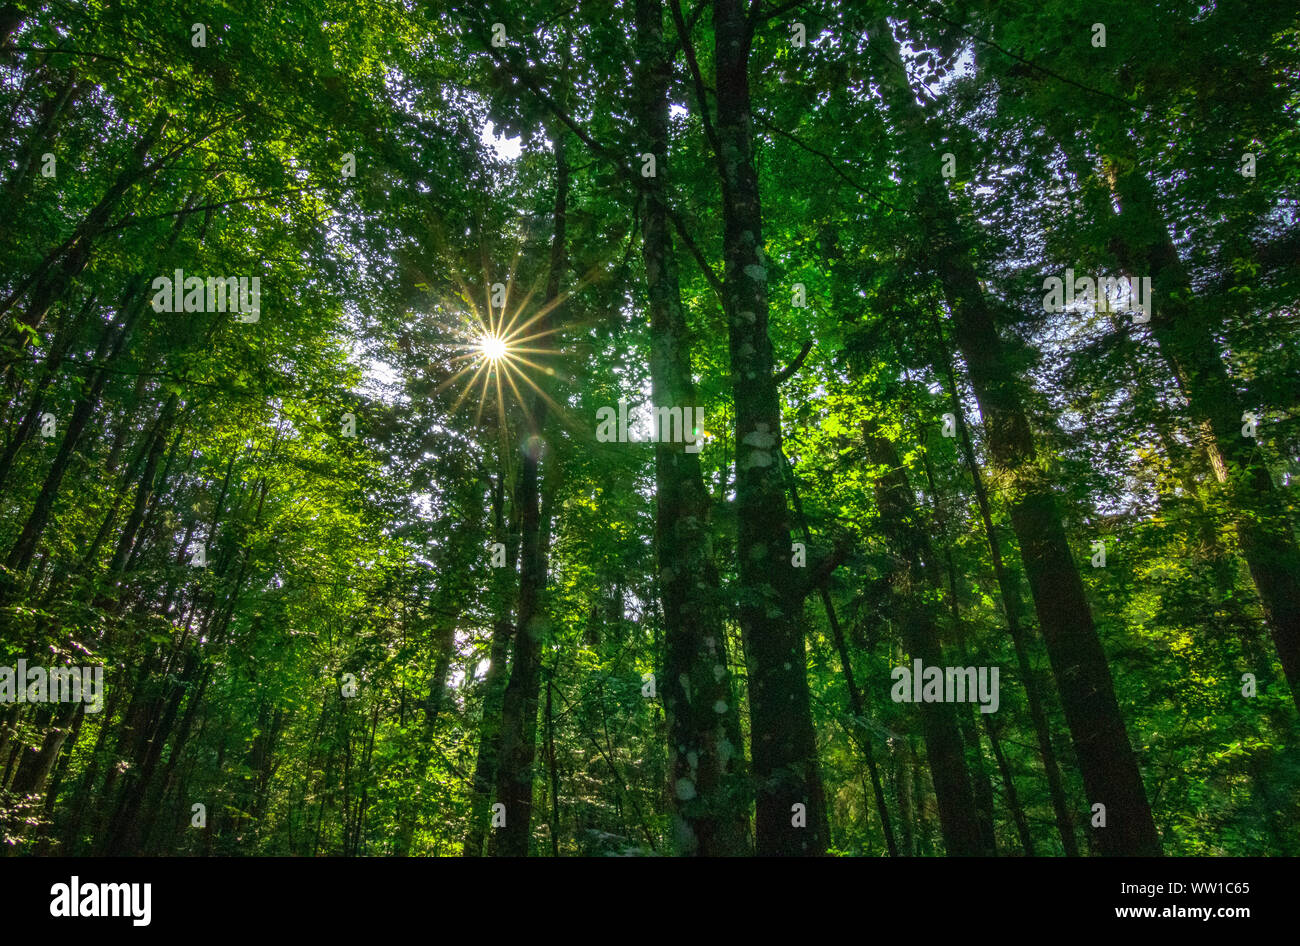 forest bathing green trees with sun star relaxing Stock Photo